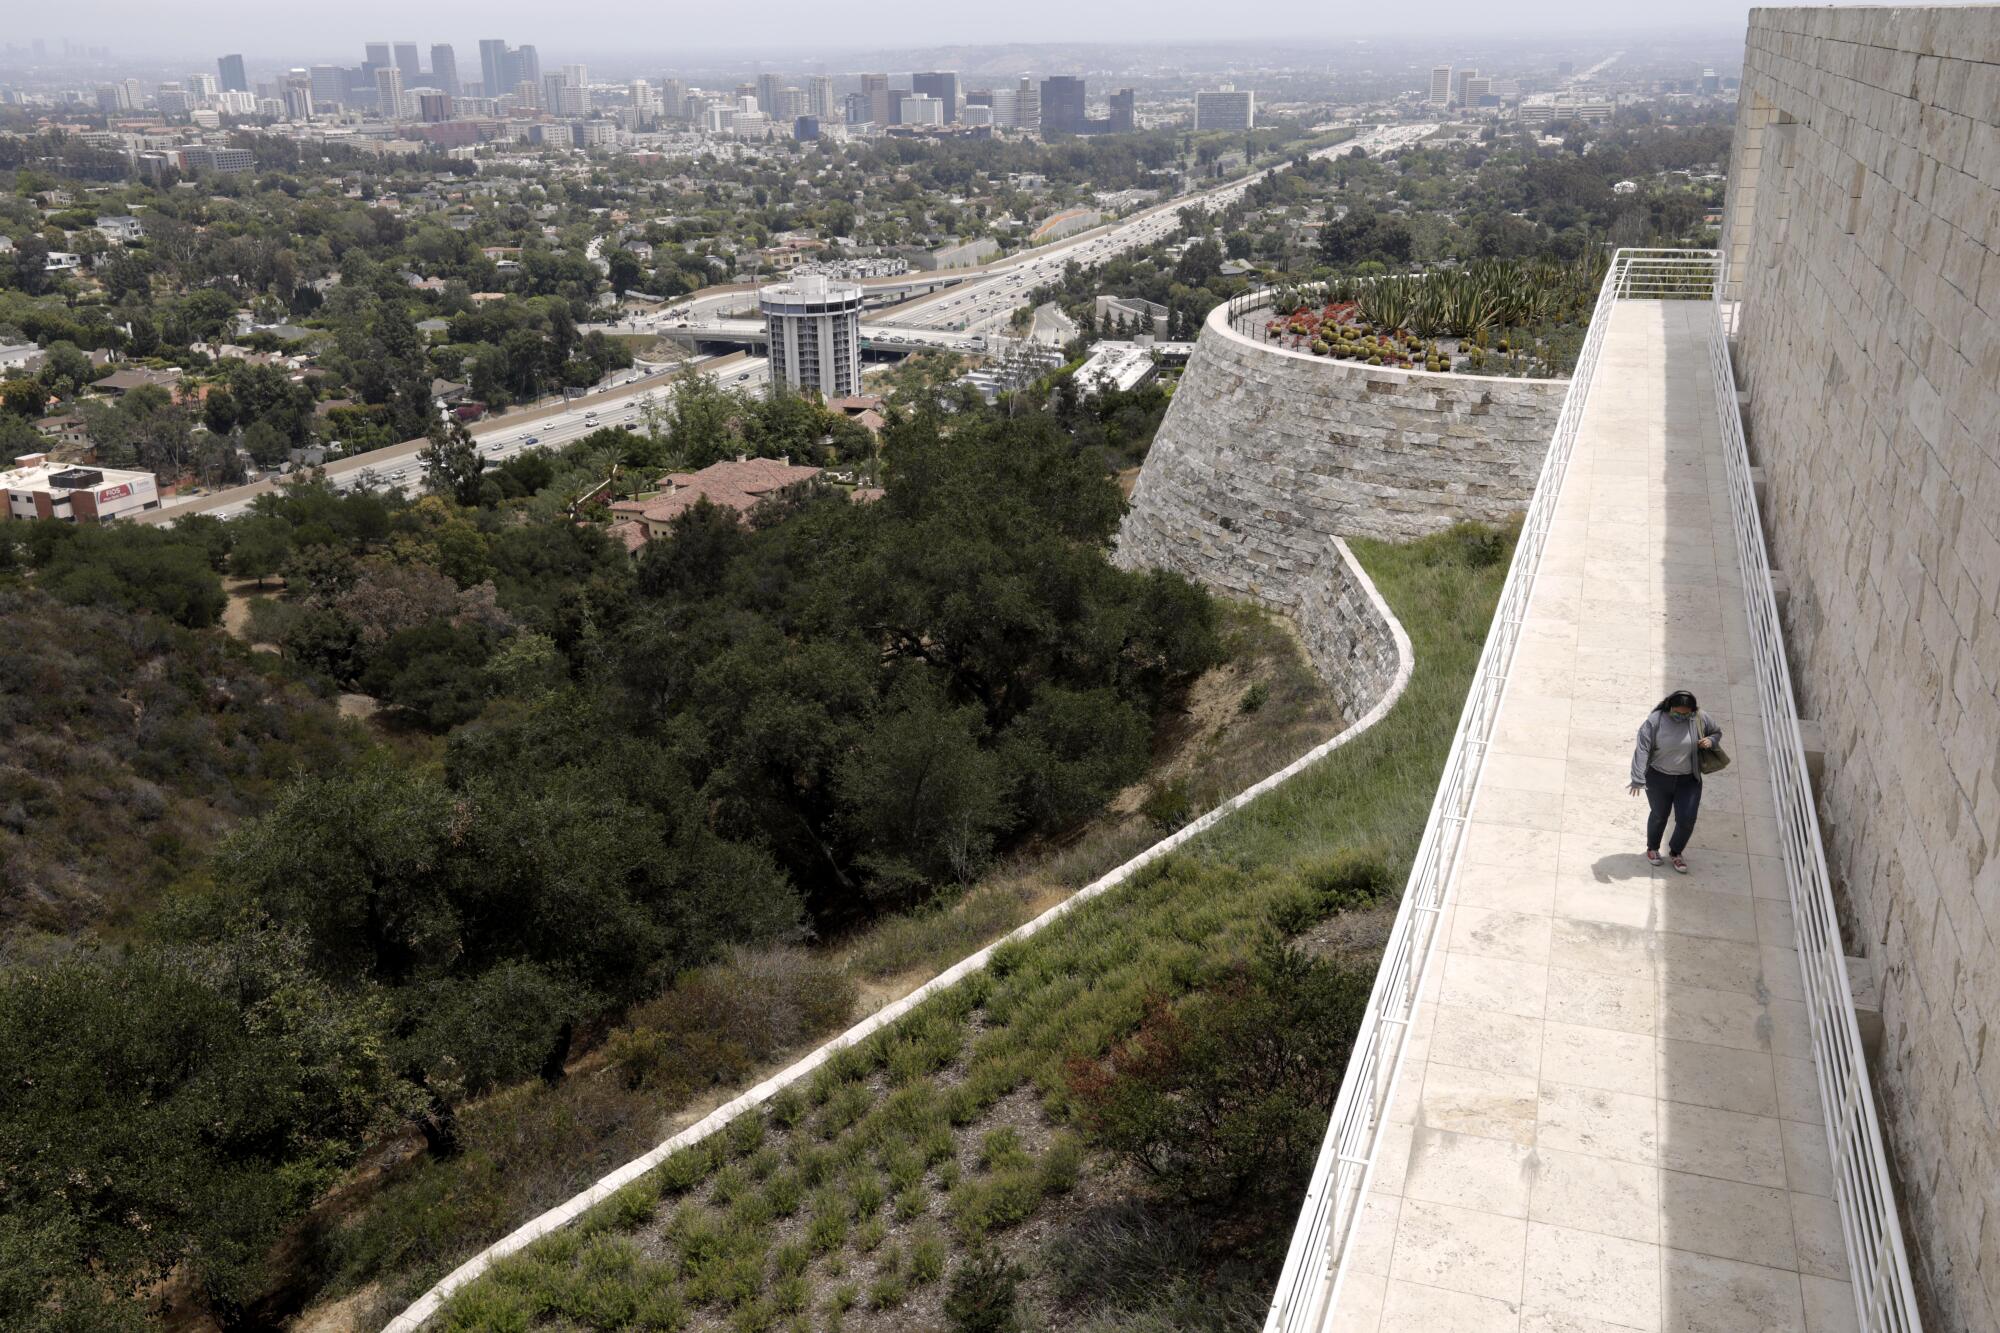 A visitor walks on a Getty Center sidewalk overlooking the 405 Freeway and Westside skyline